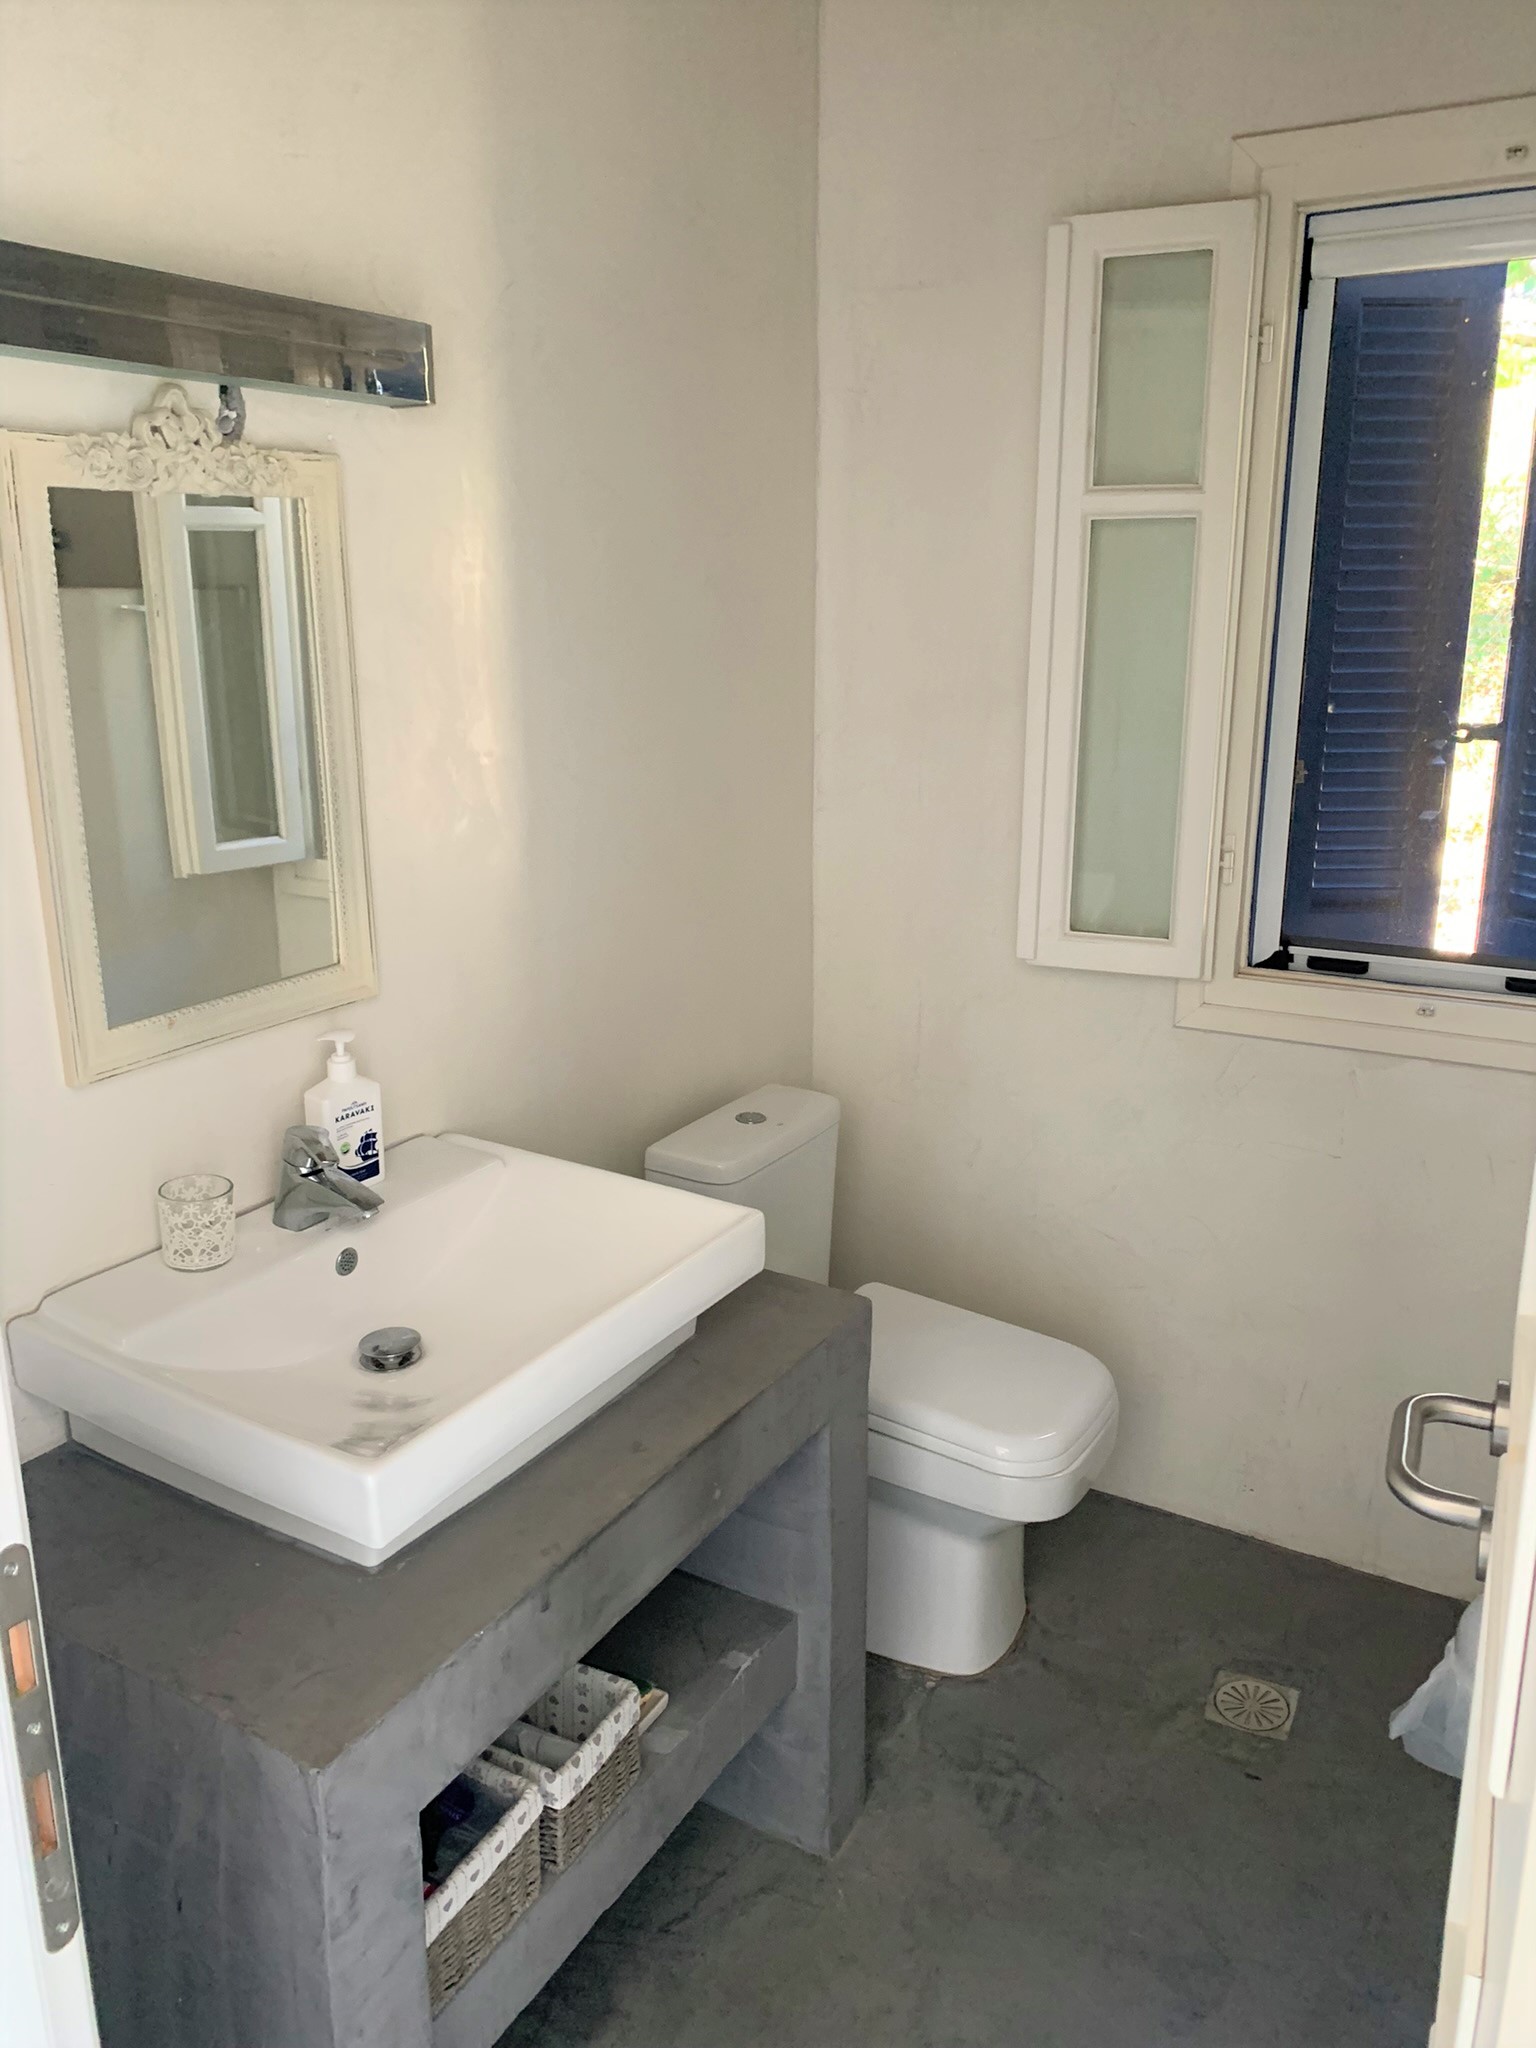 Bathroom of house for rent on Ithaca Greece, Stavros